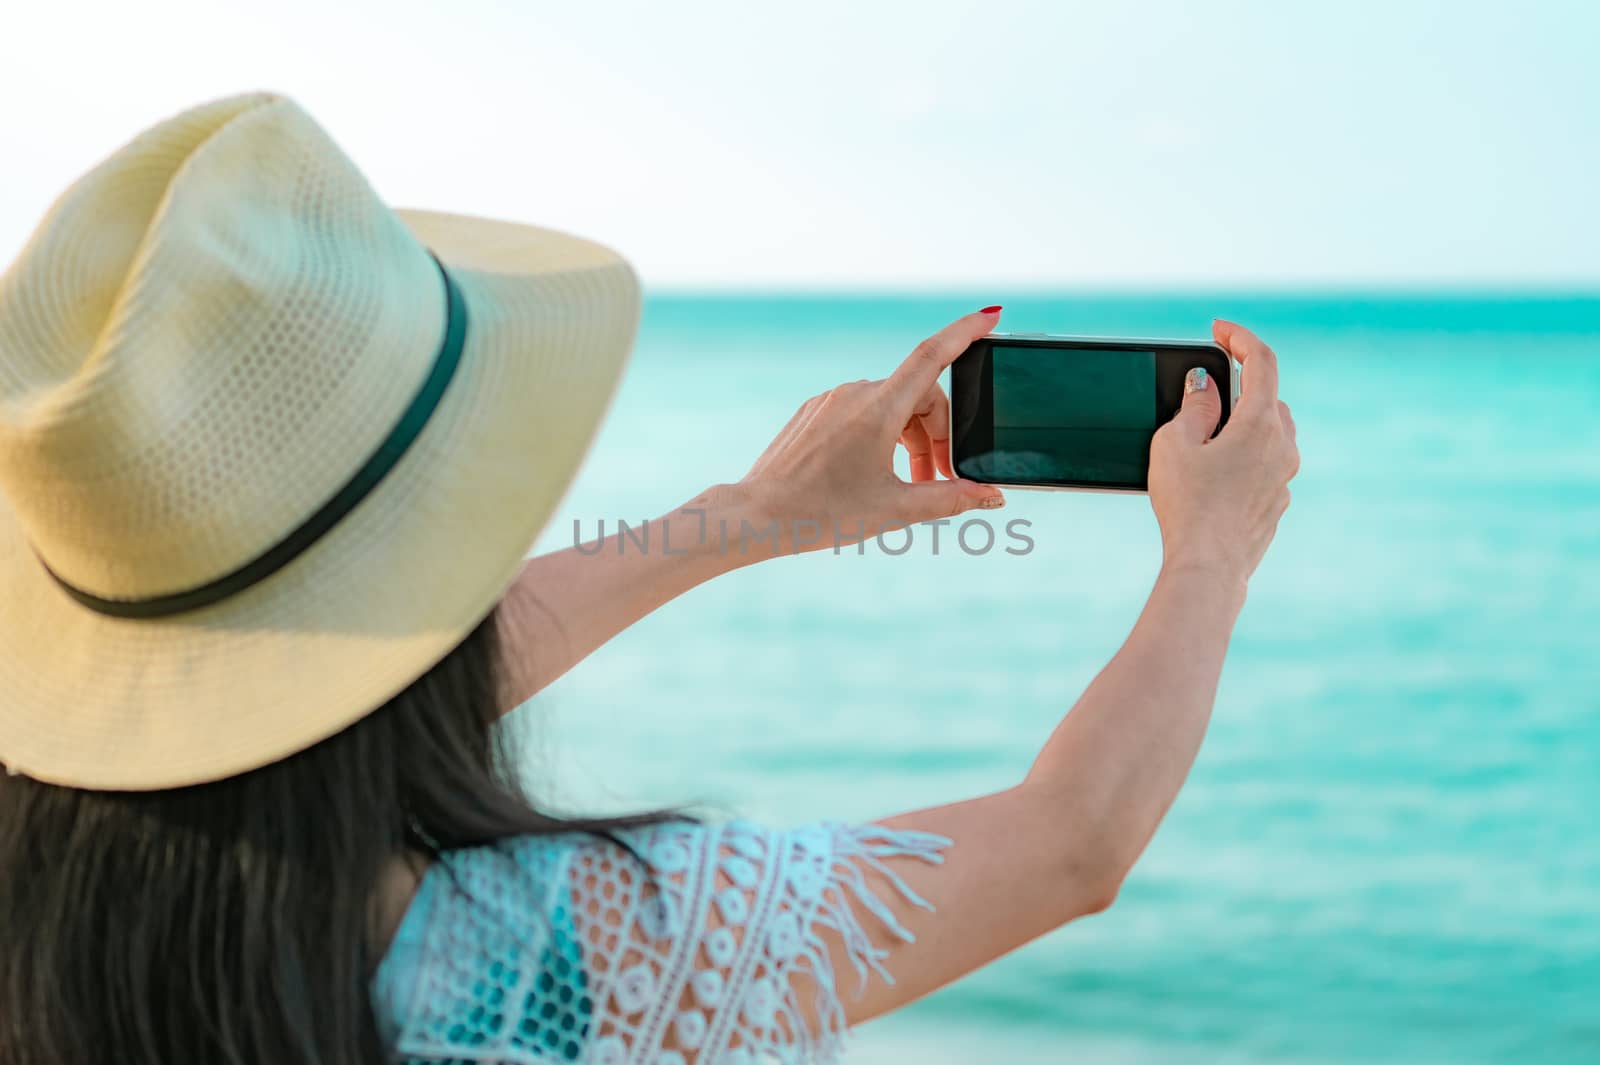 Young Asian woman wear hat use smartphone taking photo at tropical beach. Summer vacation at tropical paradise beach. Happy hipster girl travel on holiday. Woman enjoy and relax life. Summer vibes. 